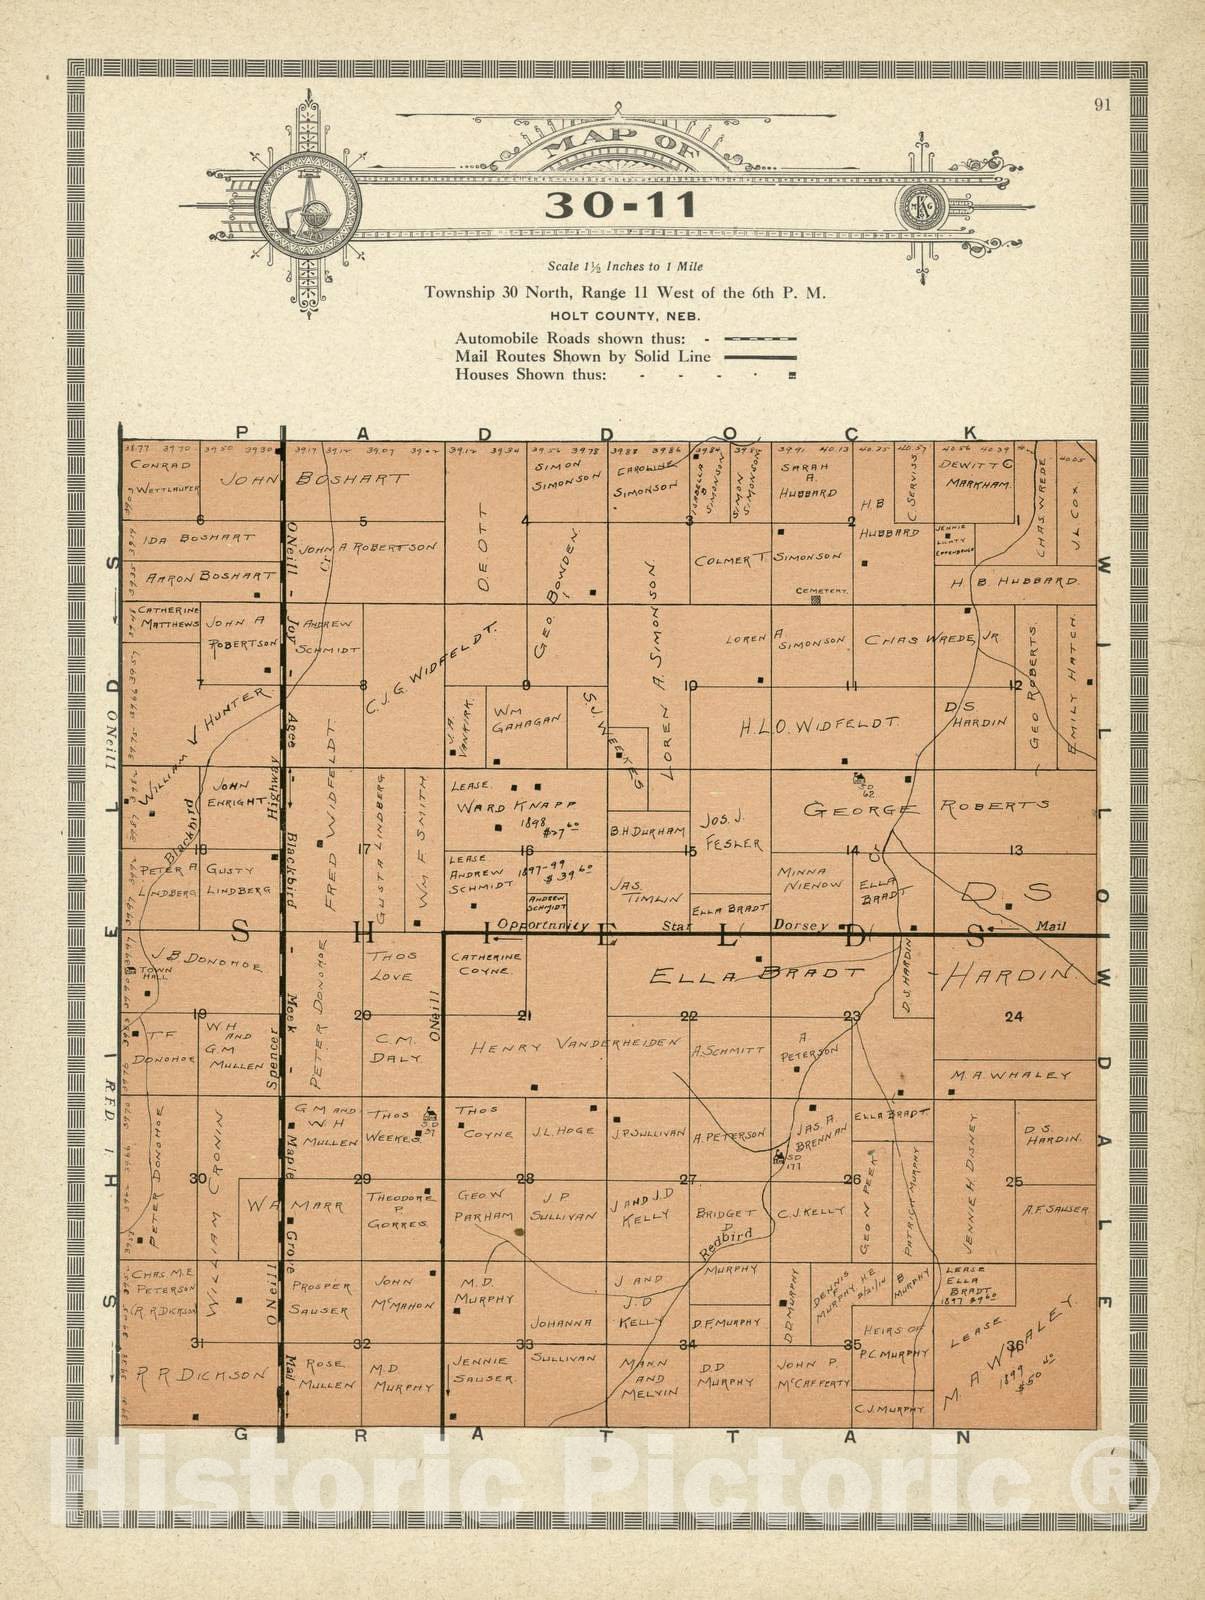 Historic 1915 Map - Atlas and plat Book of Holt County, Nebraska - Map of 30-11 - Standard Atlas and Directory of Holt County, Nebraska